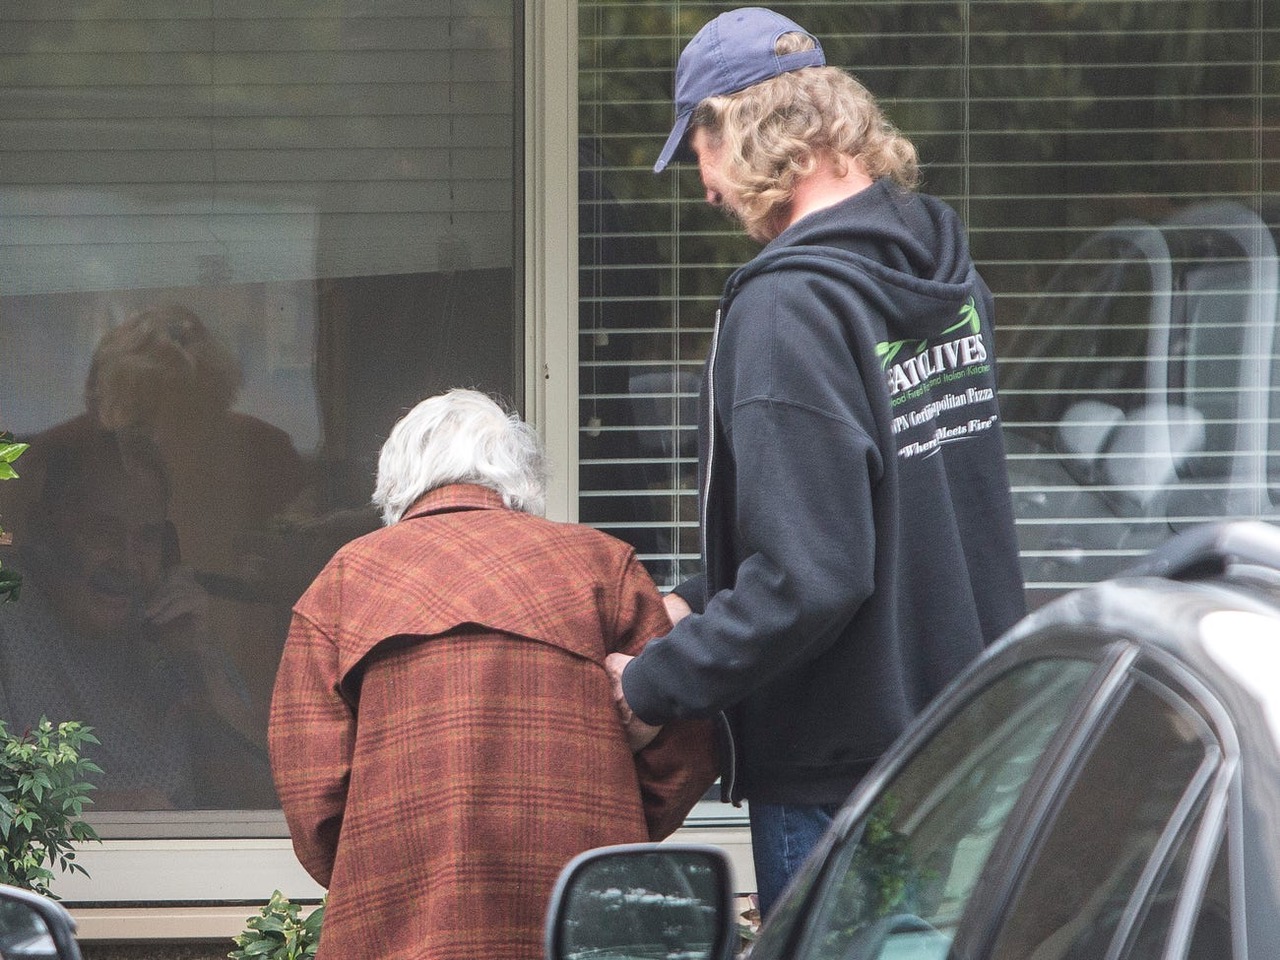 Avoid care homes if you can - the Life Care Center in Washington state (courtesy Business Insider via ASON REDMONDAFP via Getty images)